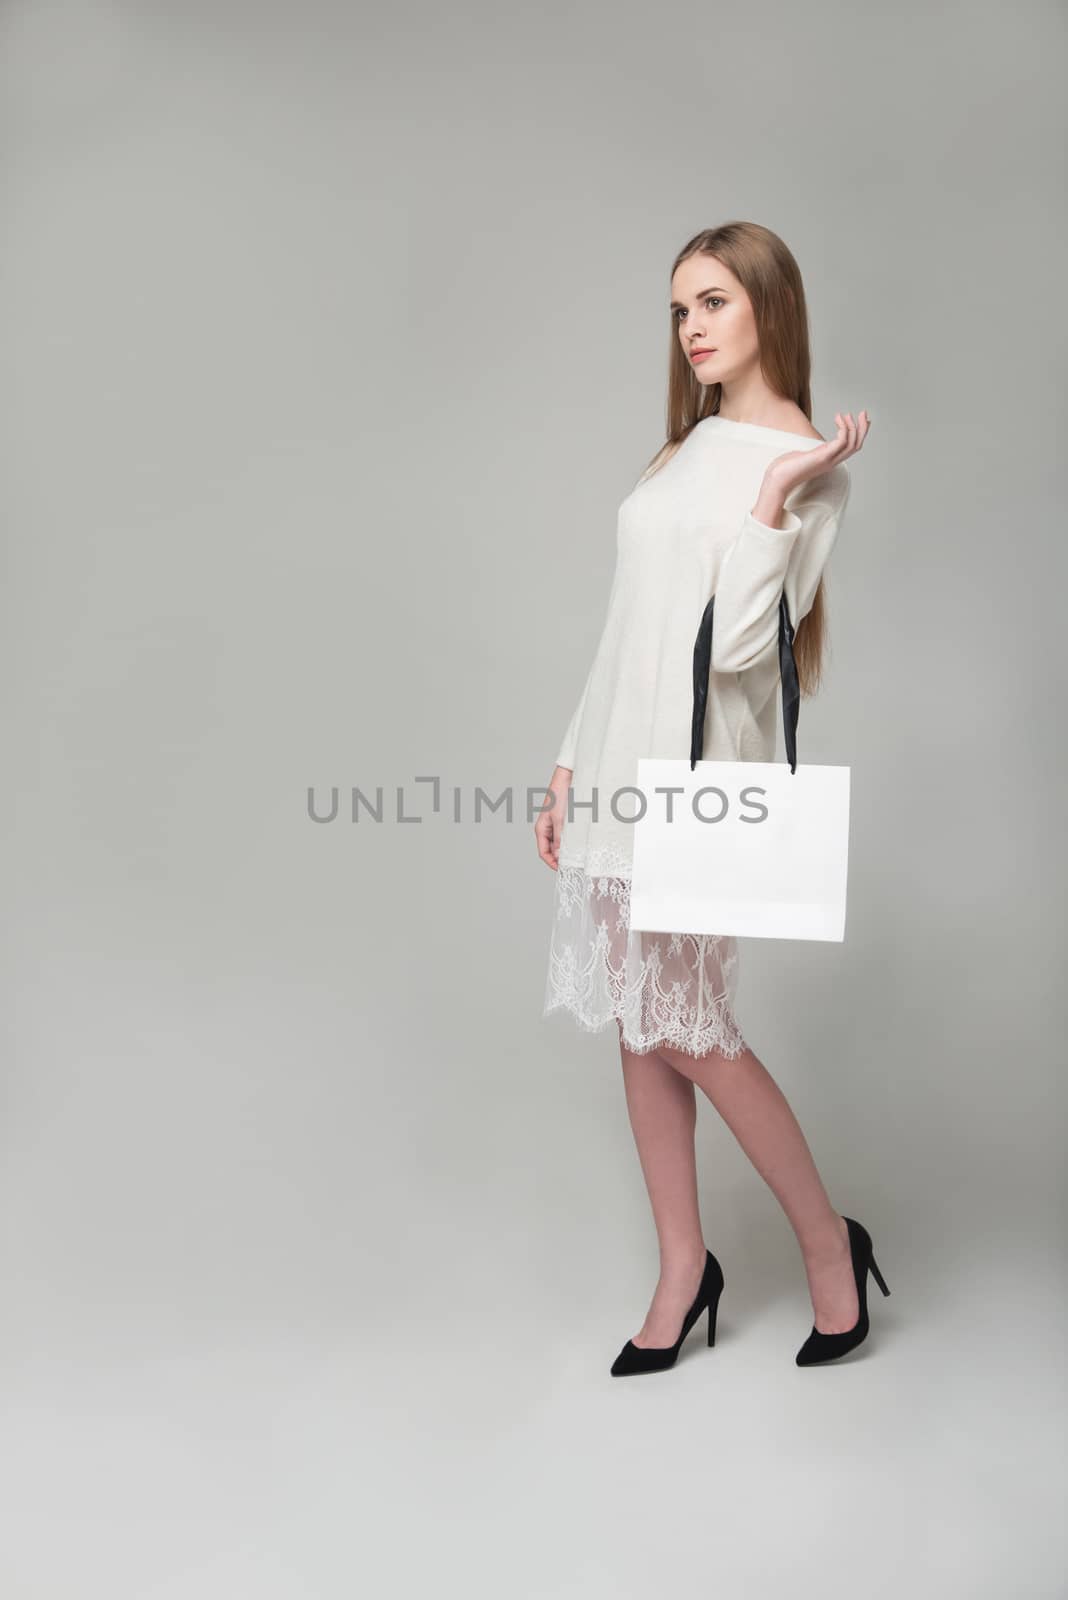 Young model long-haired blond girl in white short dress with lace stands holding white package with copy space